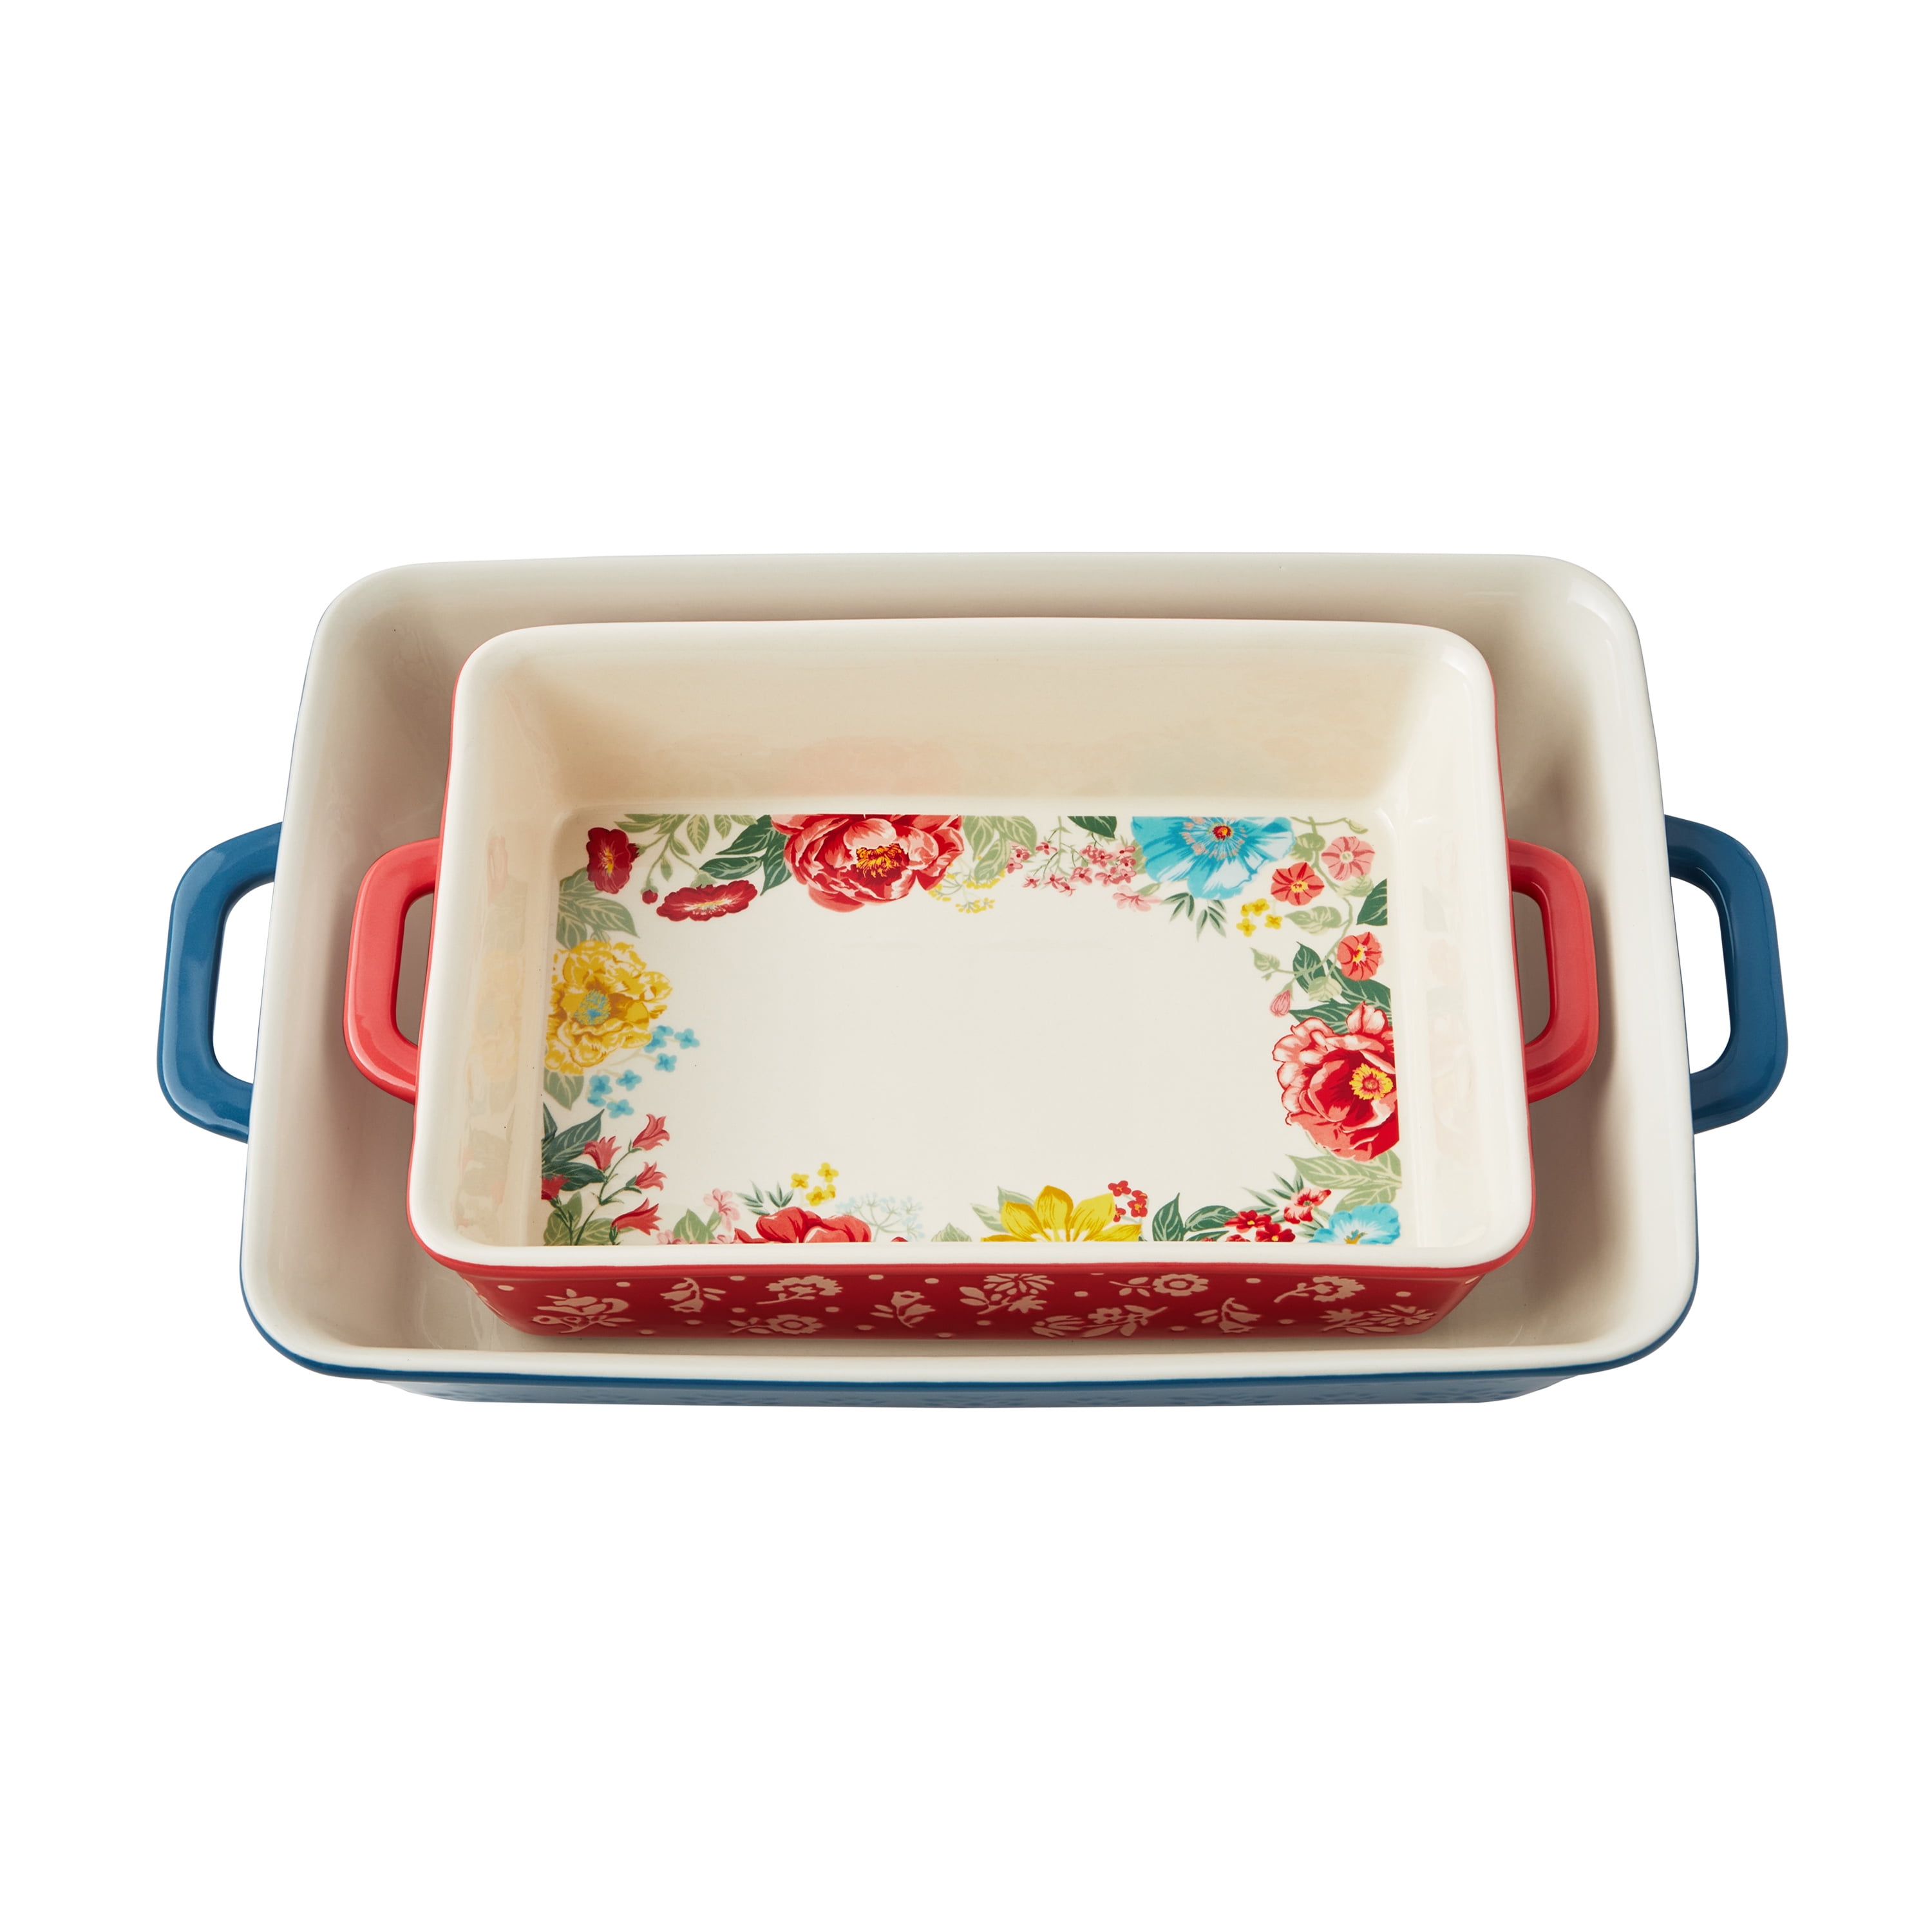 20-Piece The Pioneer Woman Bake & Prep Set w/ Baking Dish & Measuring Cups  (Blooming Bouquet, Fancy Flourish) $20 + Free Store Pickup at Walmart or FS  on Orders $35+